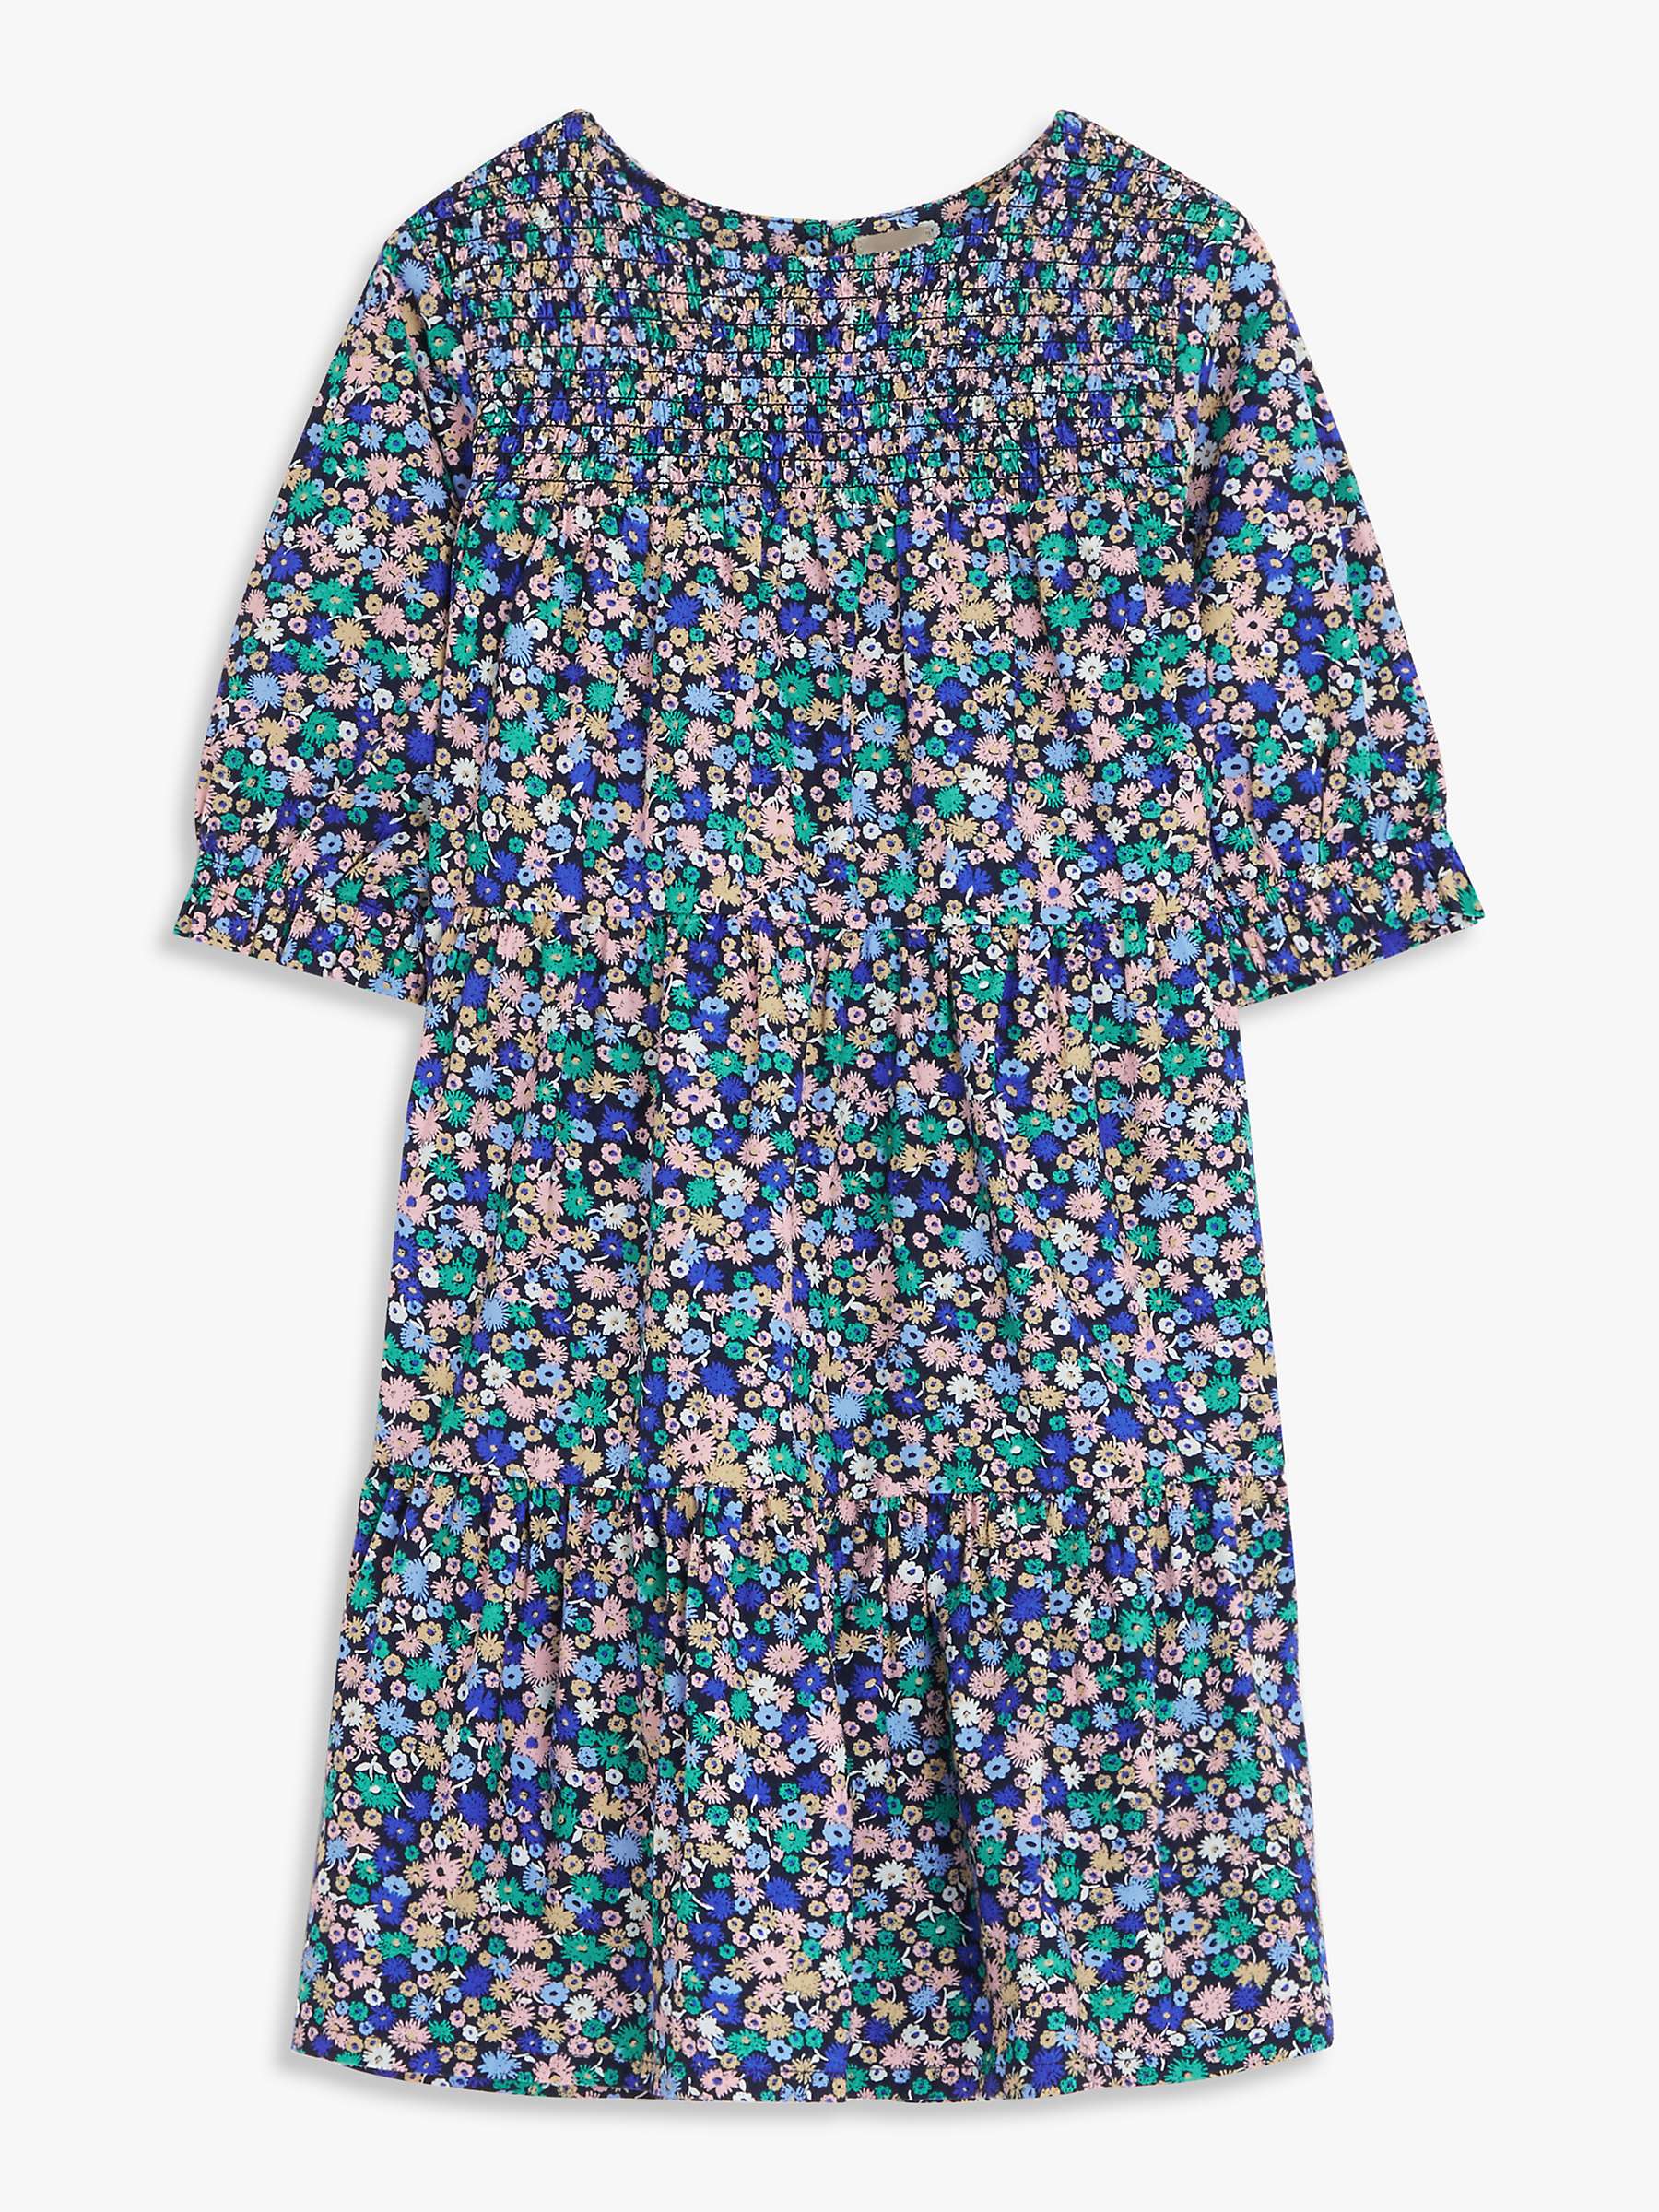 Buy John Lewis Kids' Floral Tiered Dress, Outer Space Online at johnlewis.com